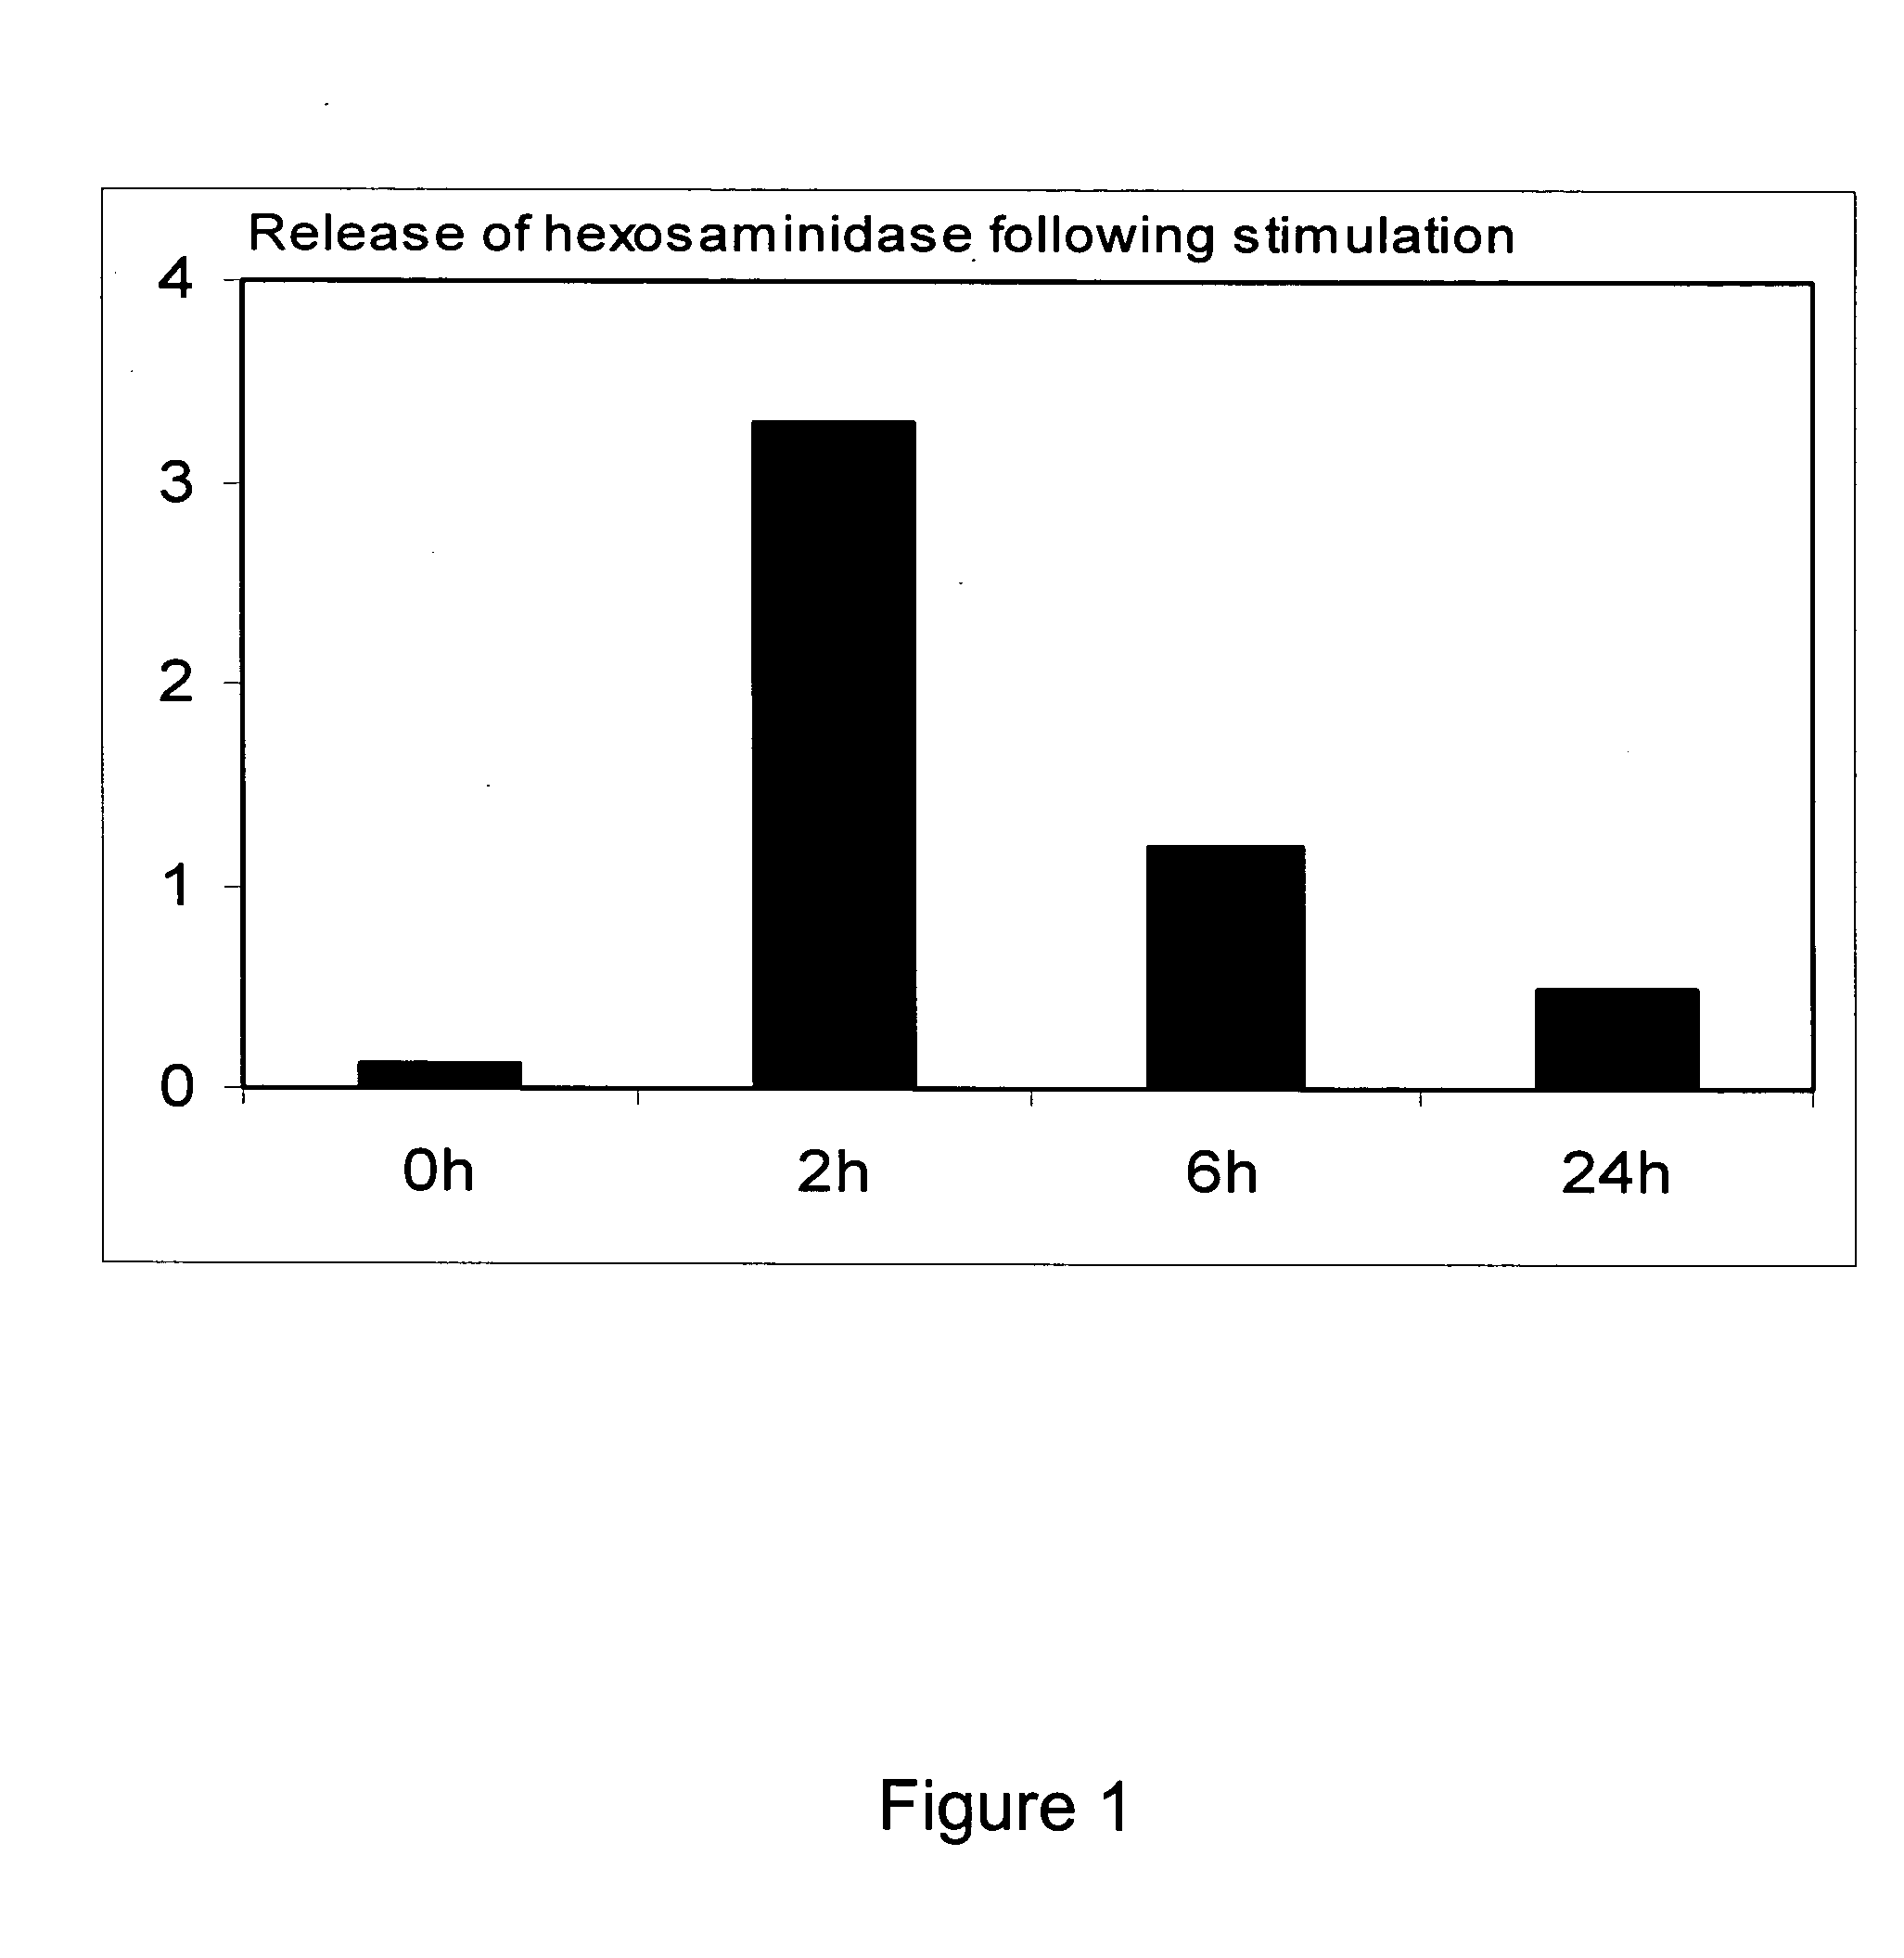 Method to identify and analyze genes having modified expression in activated cells with secretory lysosomes